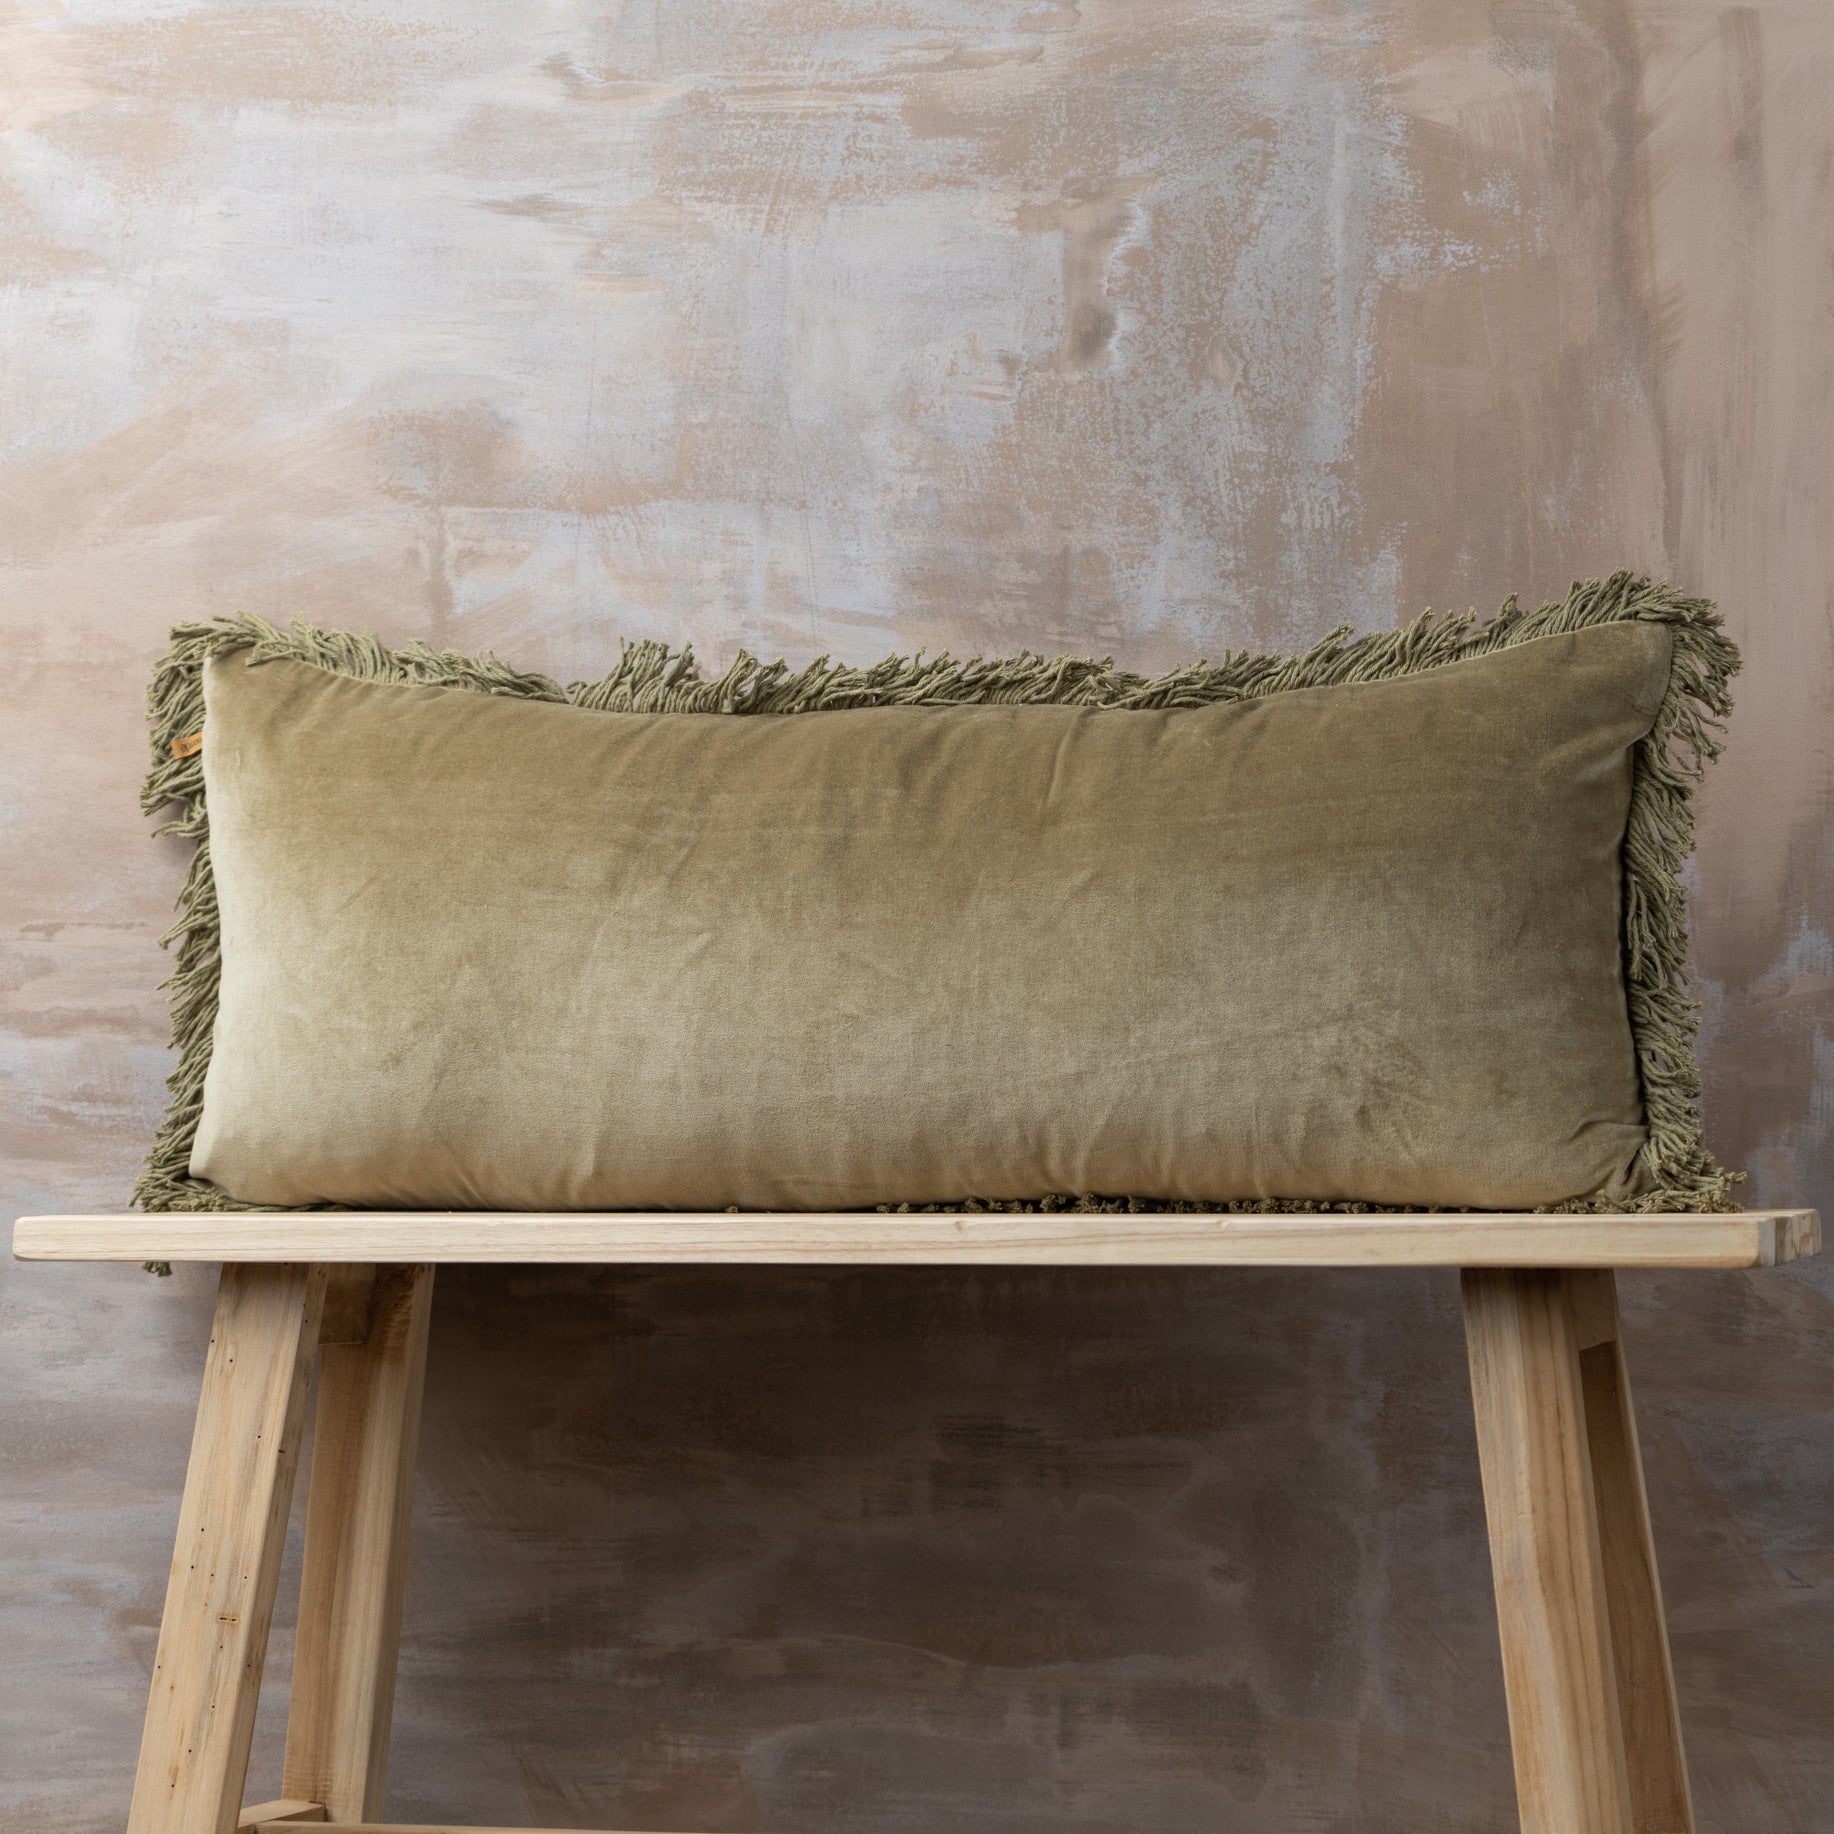 The Olive Velvet Bolster Cushion is the epitome of relaxed, retro styling. With super soft, with vintage wash tones and frayed edge detail, it adds an understated luxury to your room. Made with 100% cotton, measures 15.75" x 35.43".